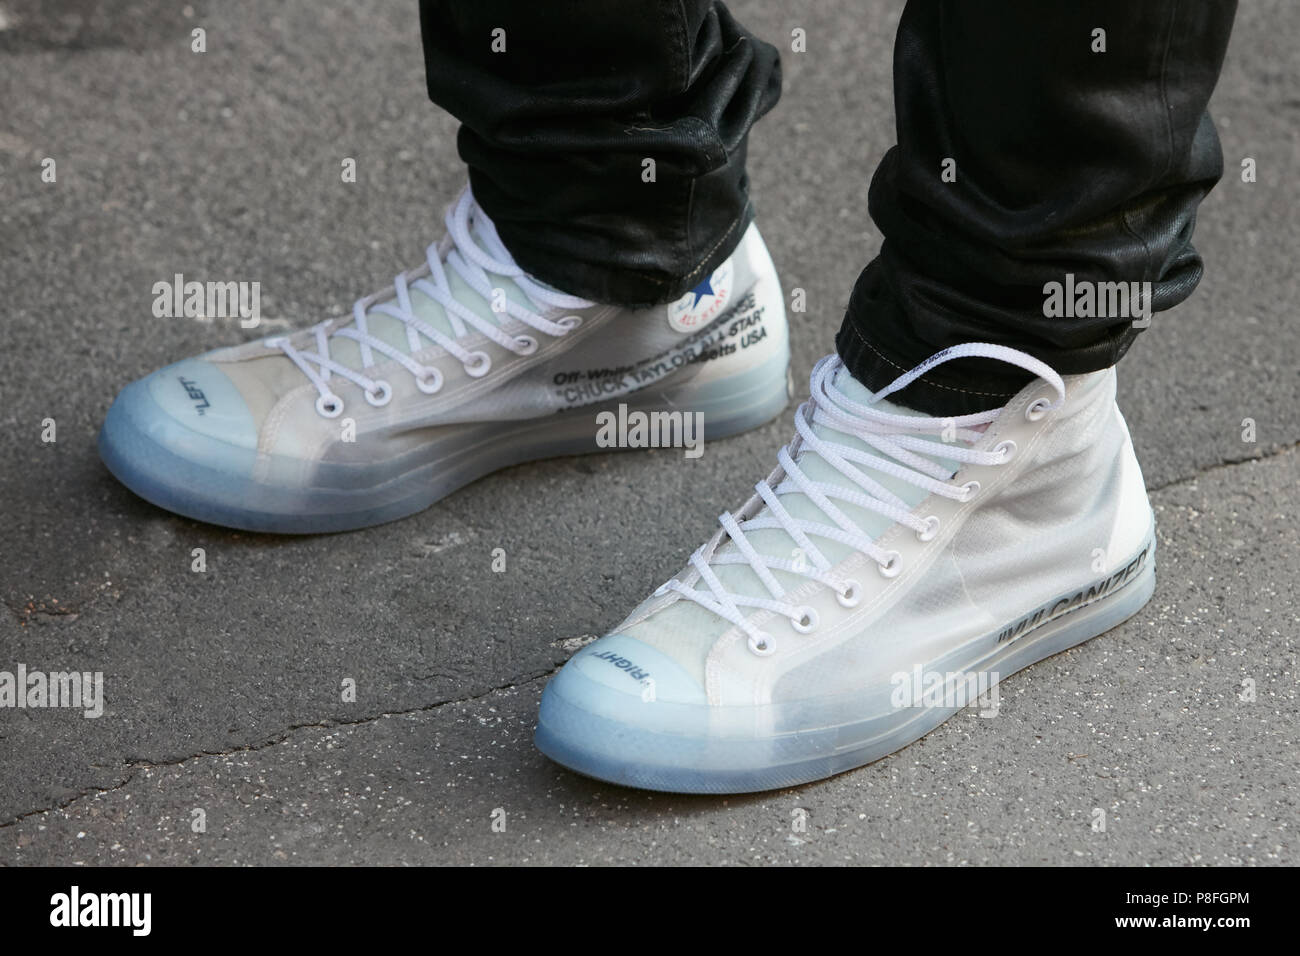 off white transparent shoes